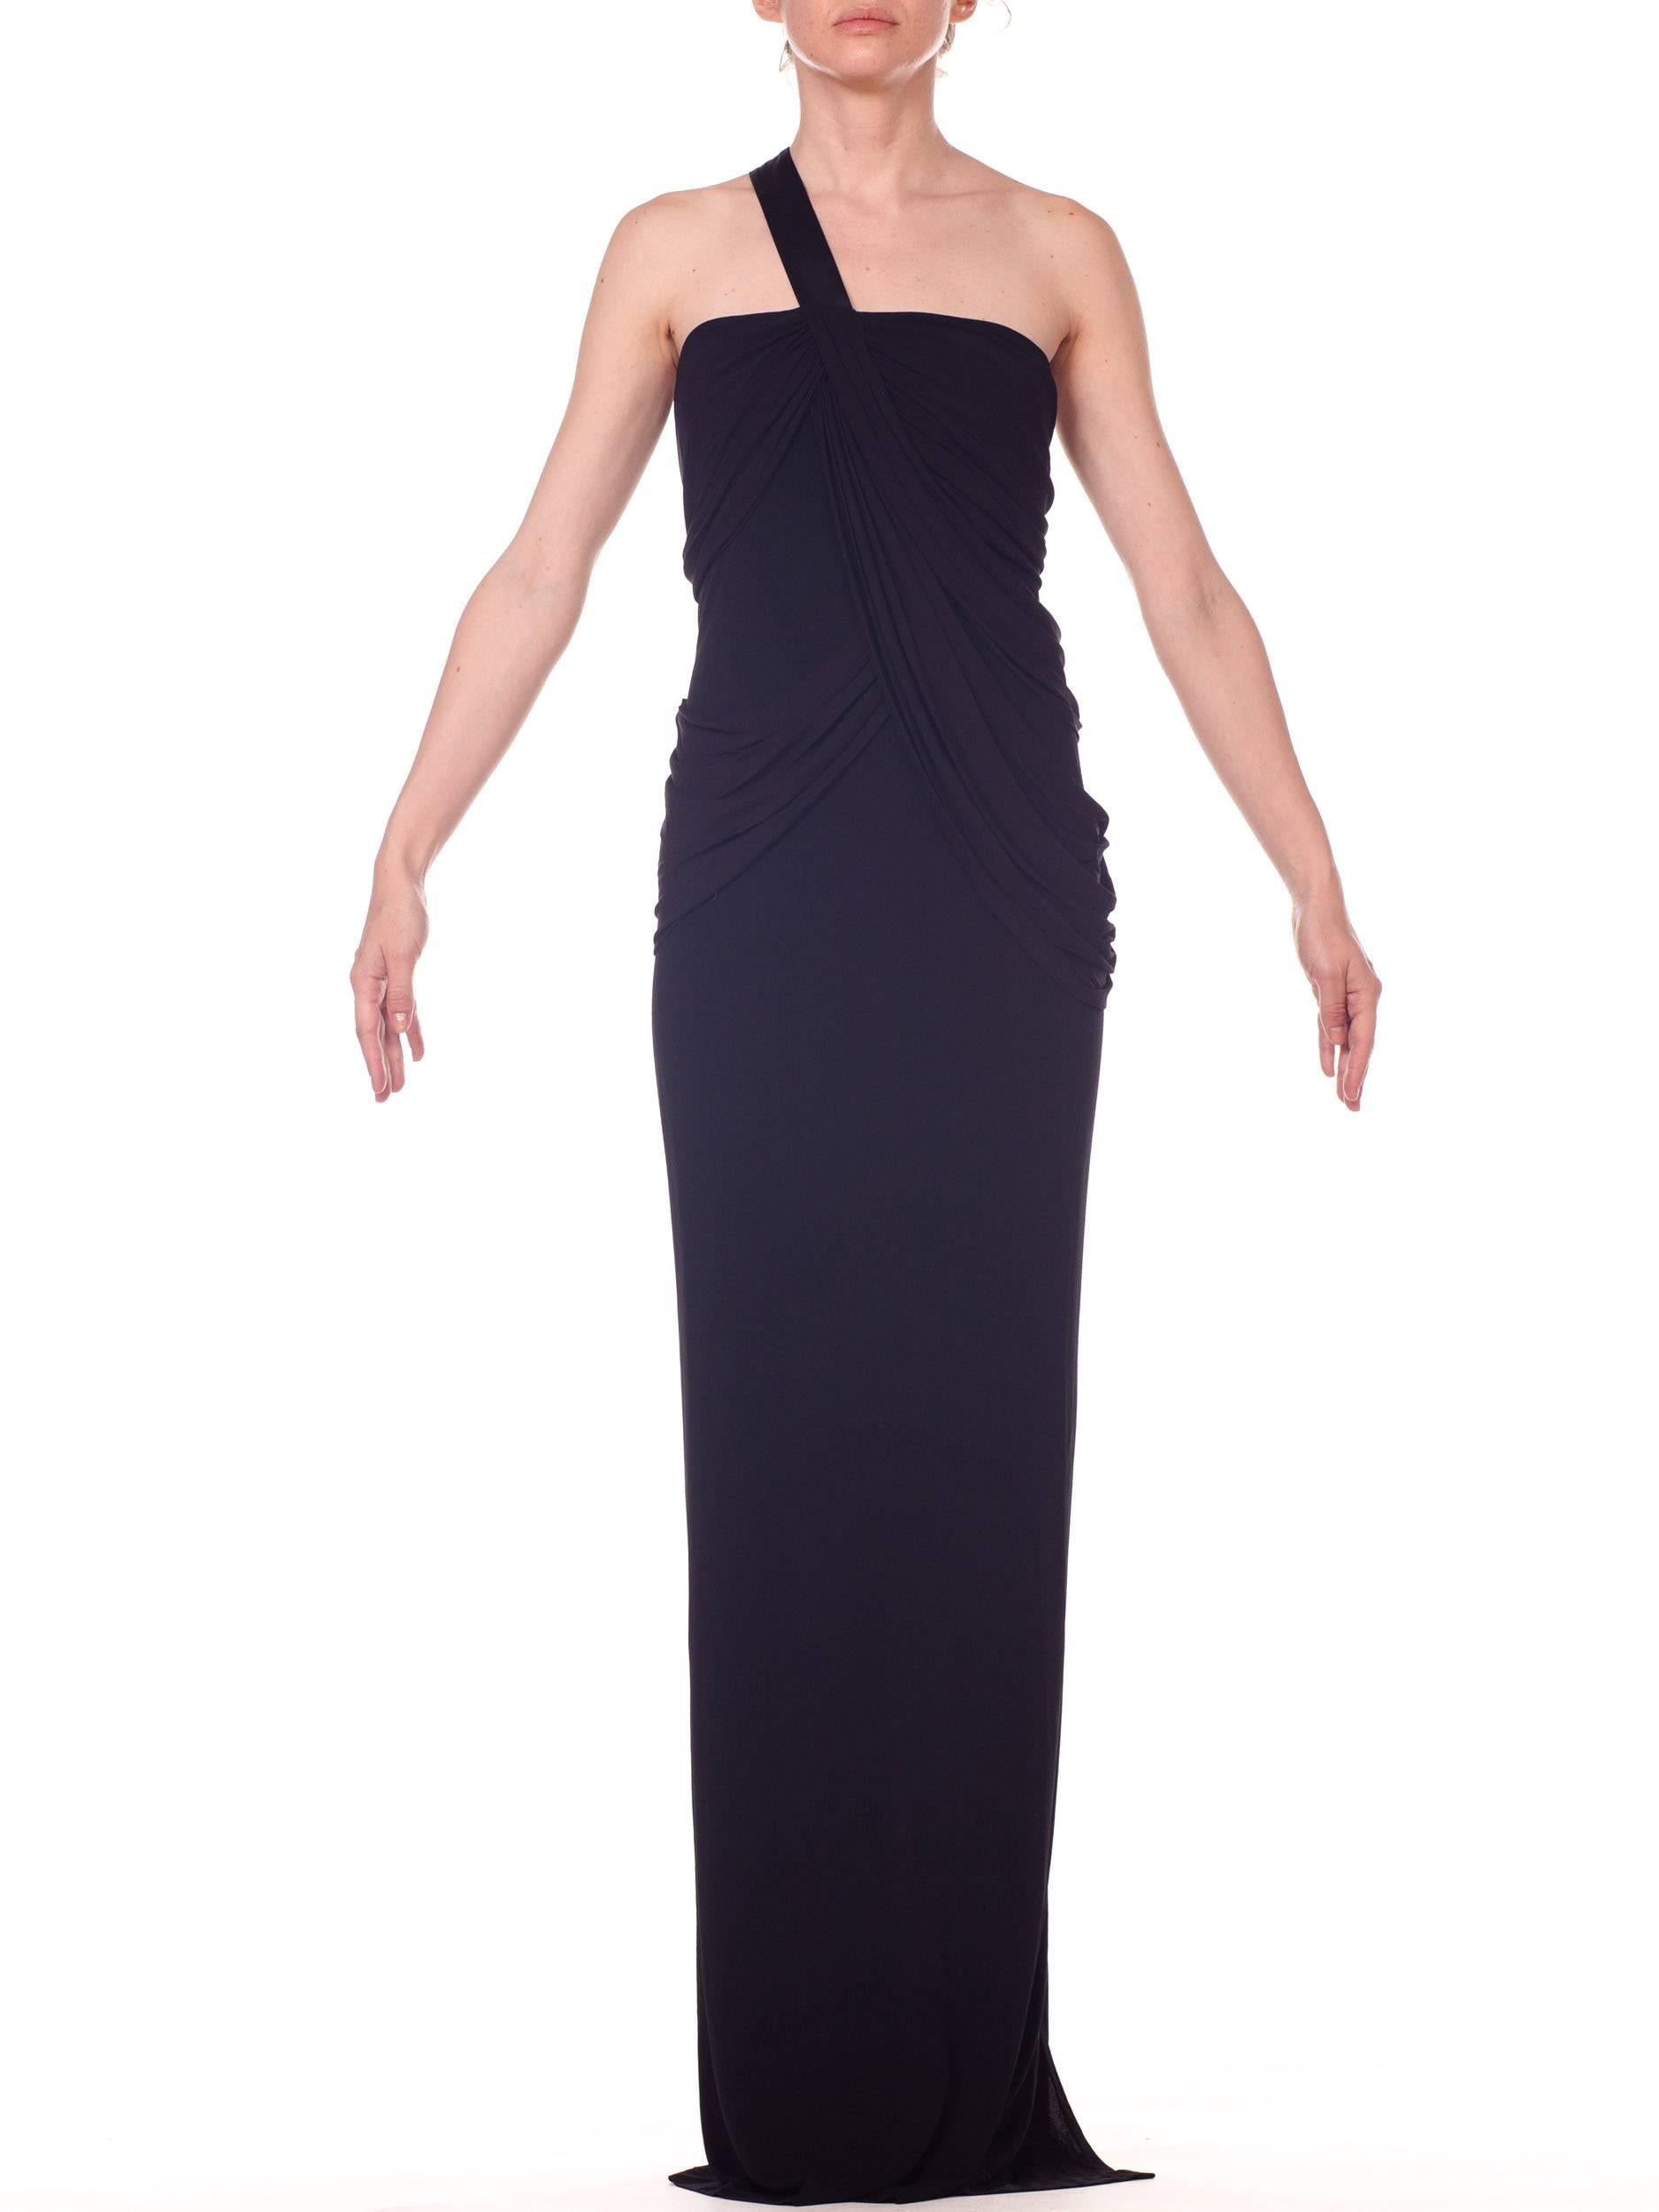 2000S Black Poly/Viscose Jersey Slinky Asymmetrically Draped Gown For Sale 1